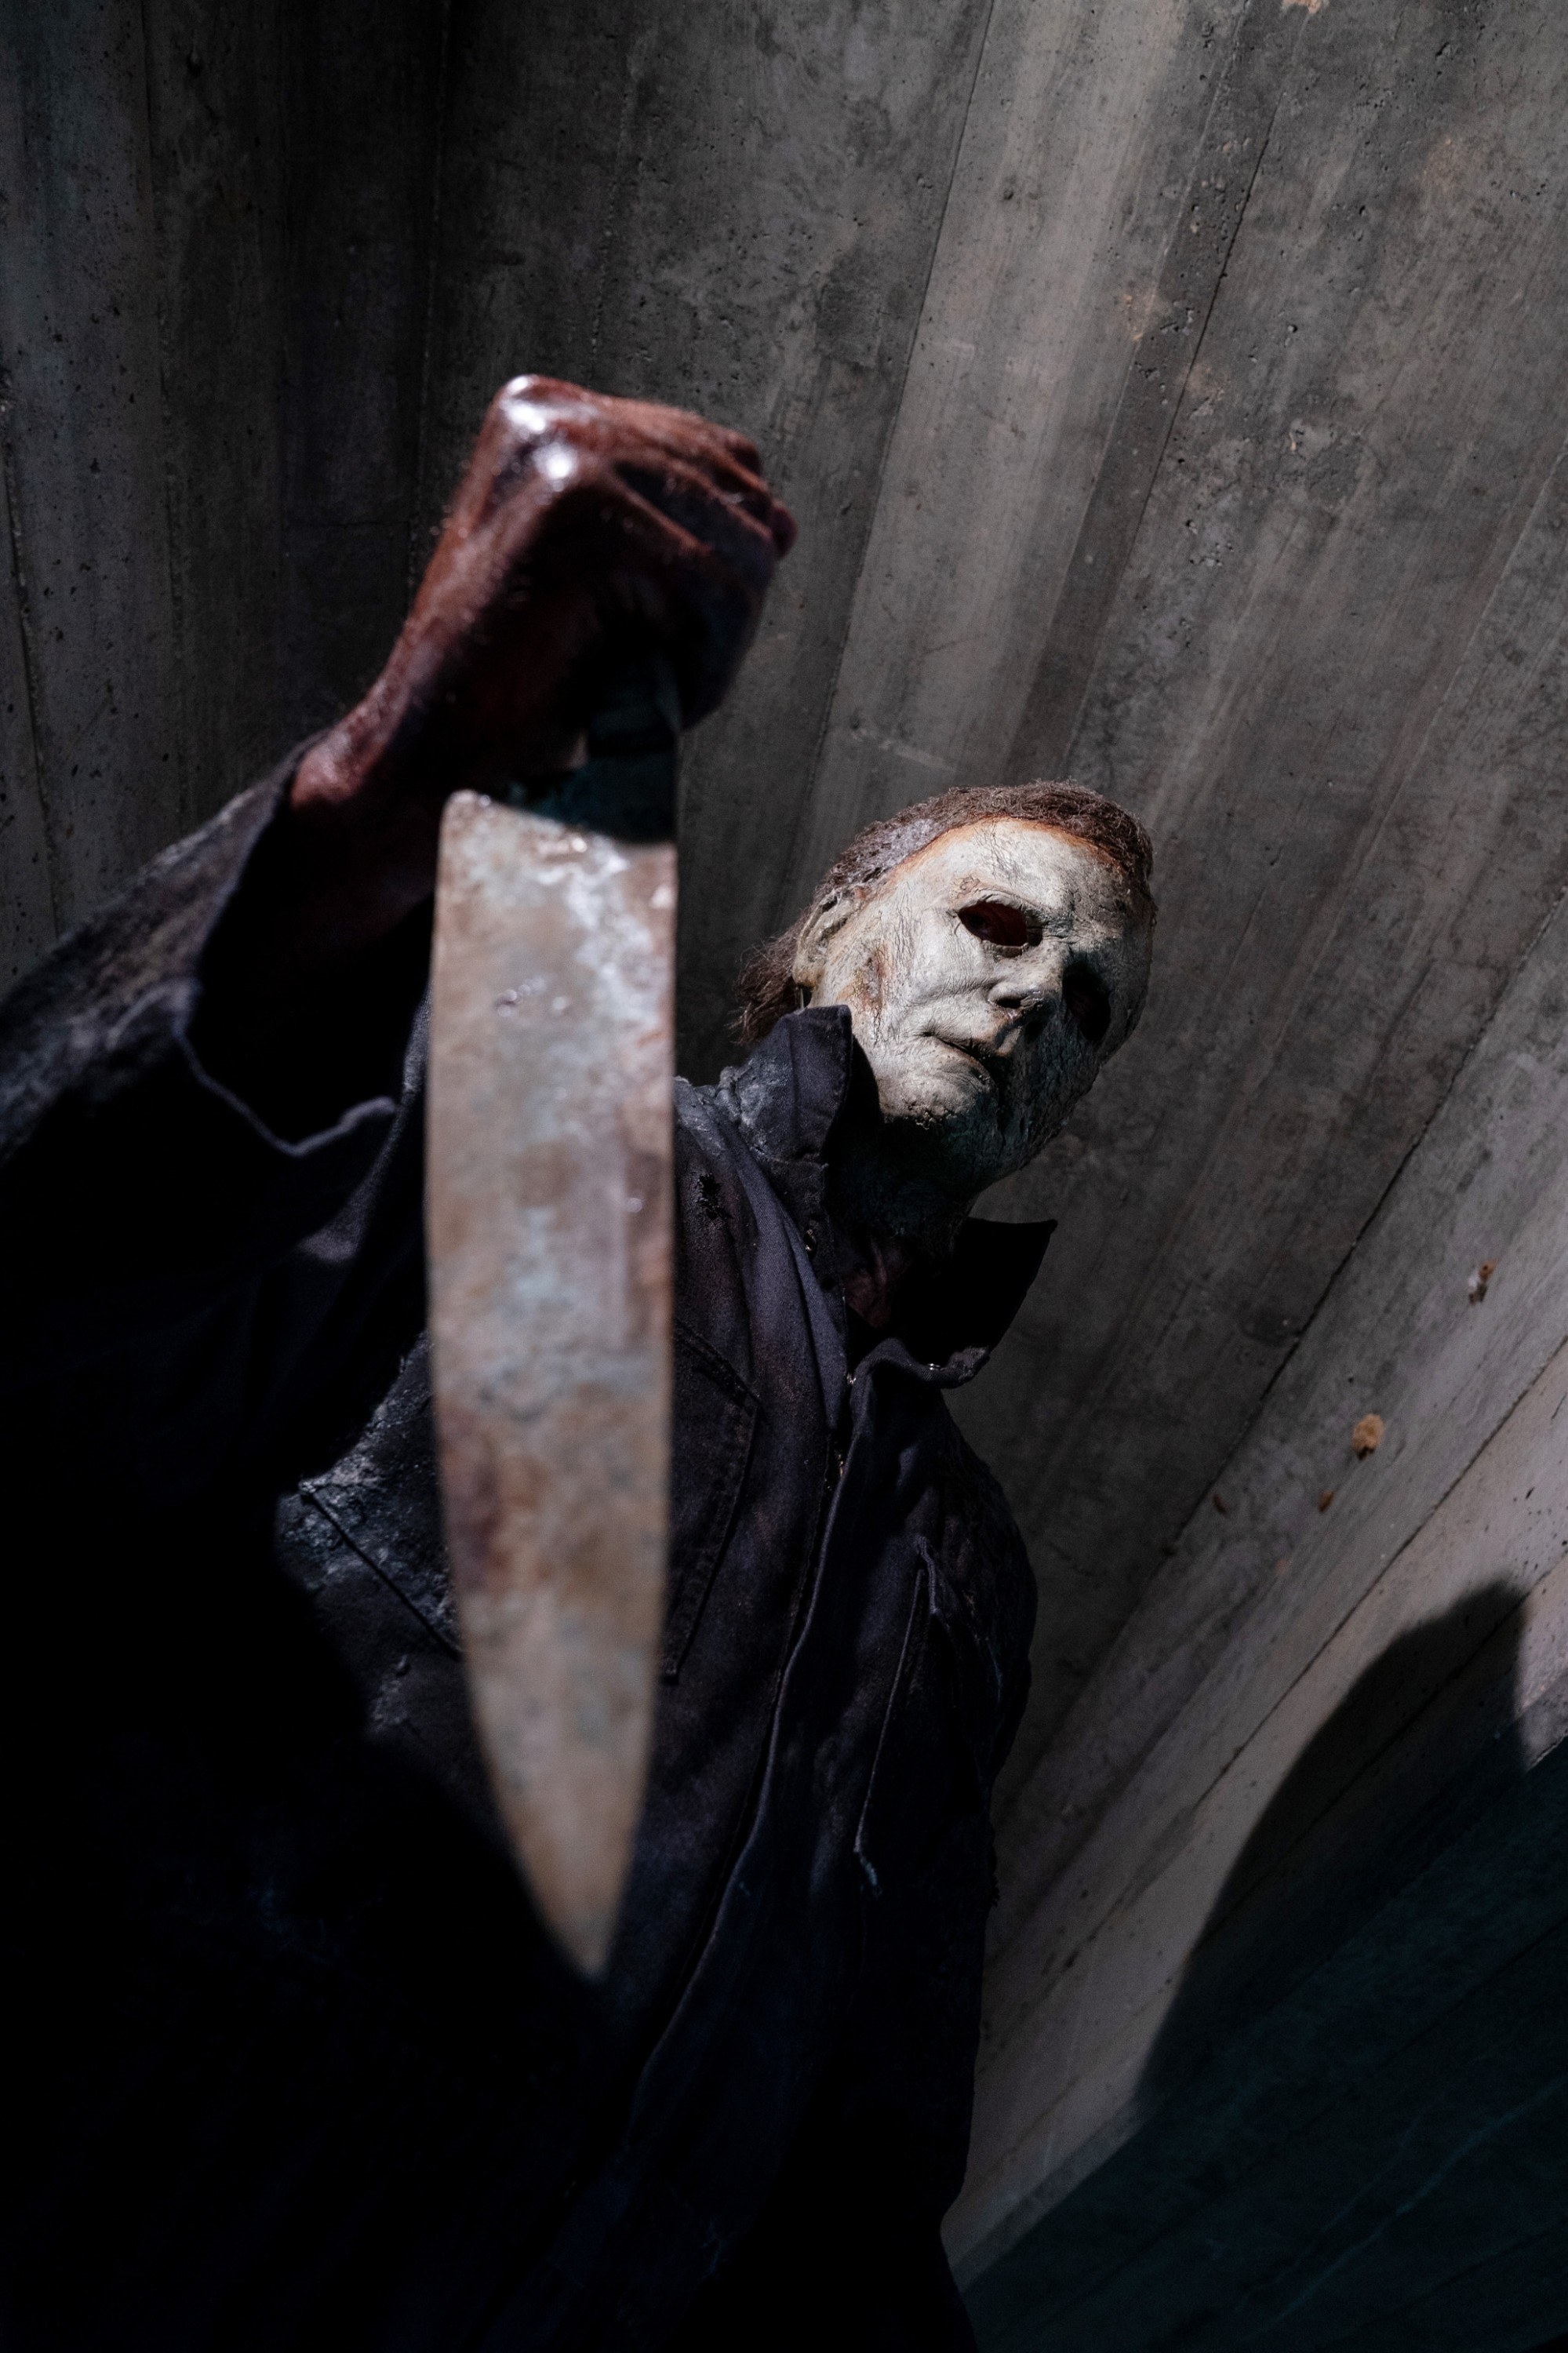 Michael Myers holding his iconic kitchen knife